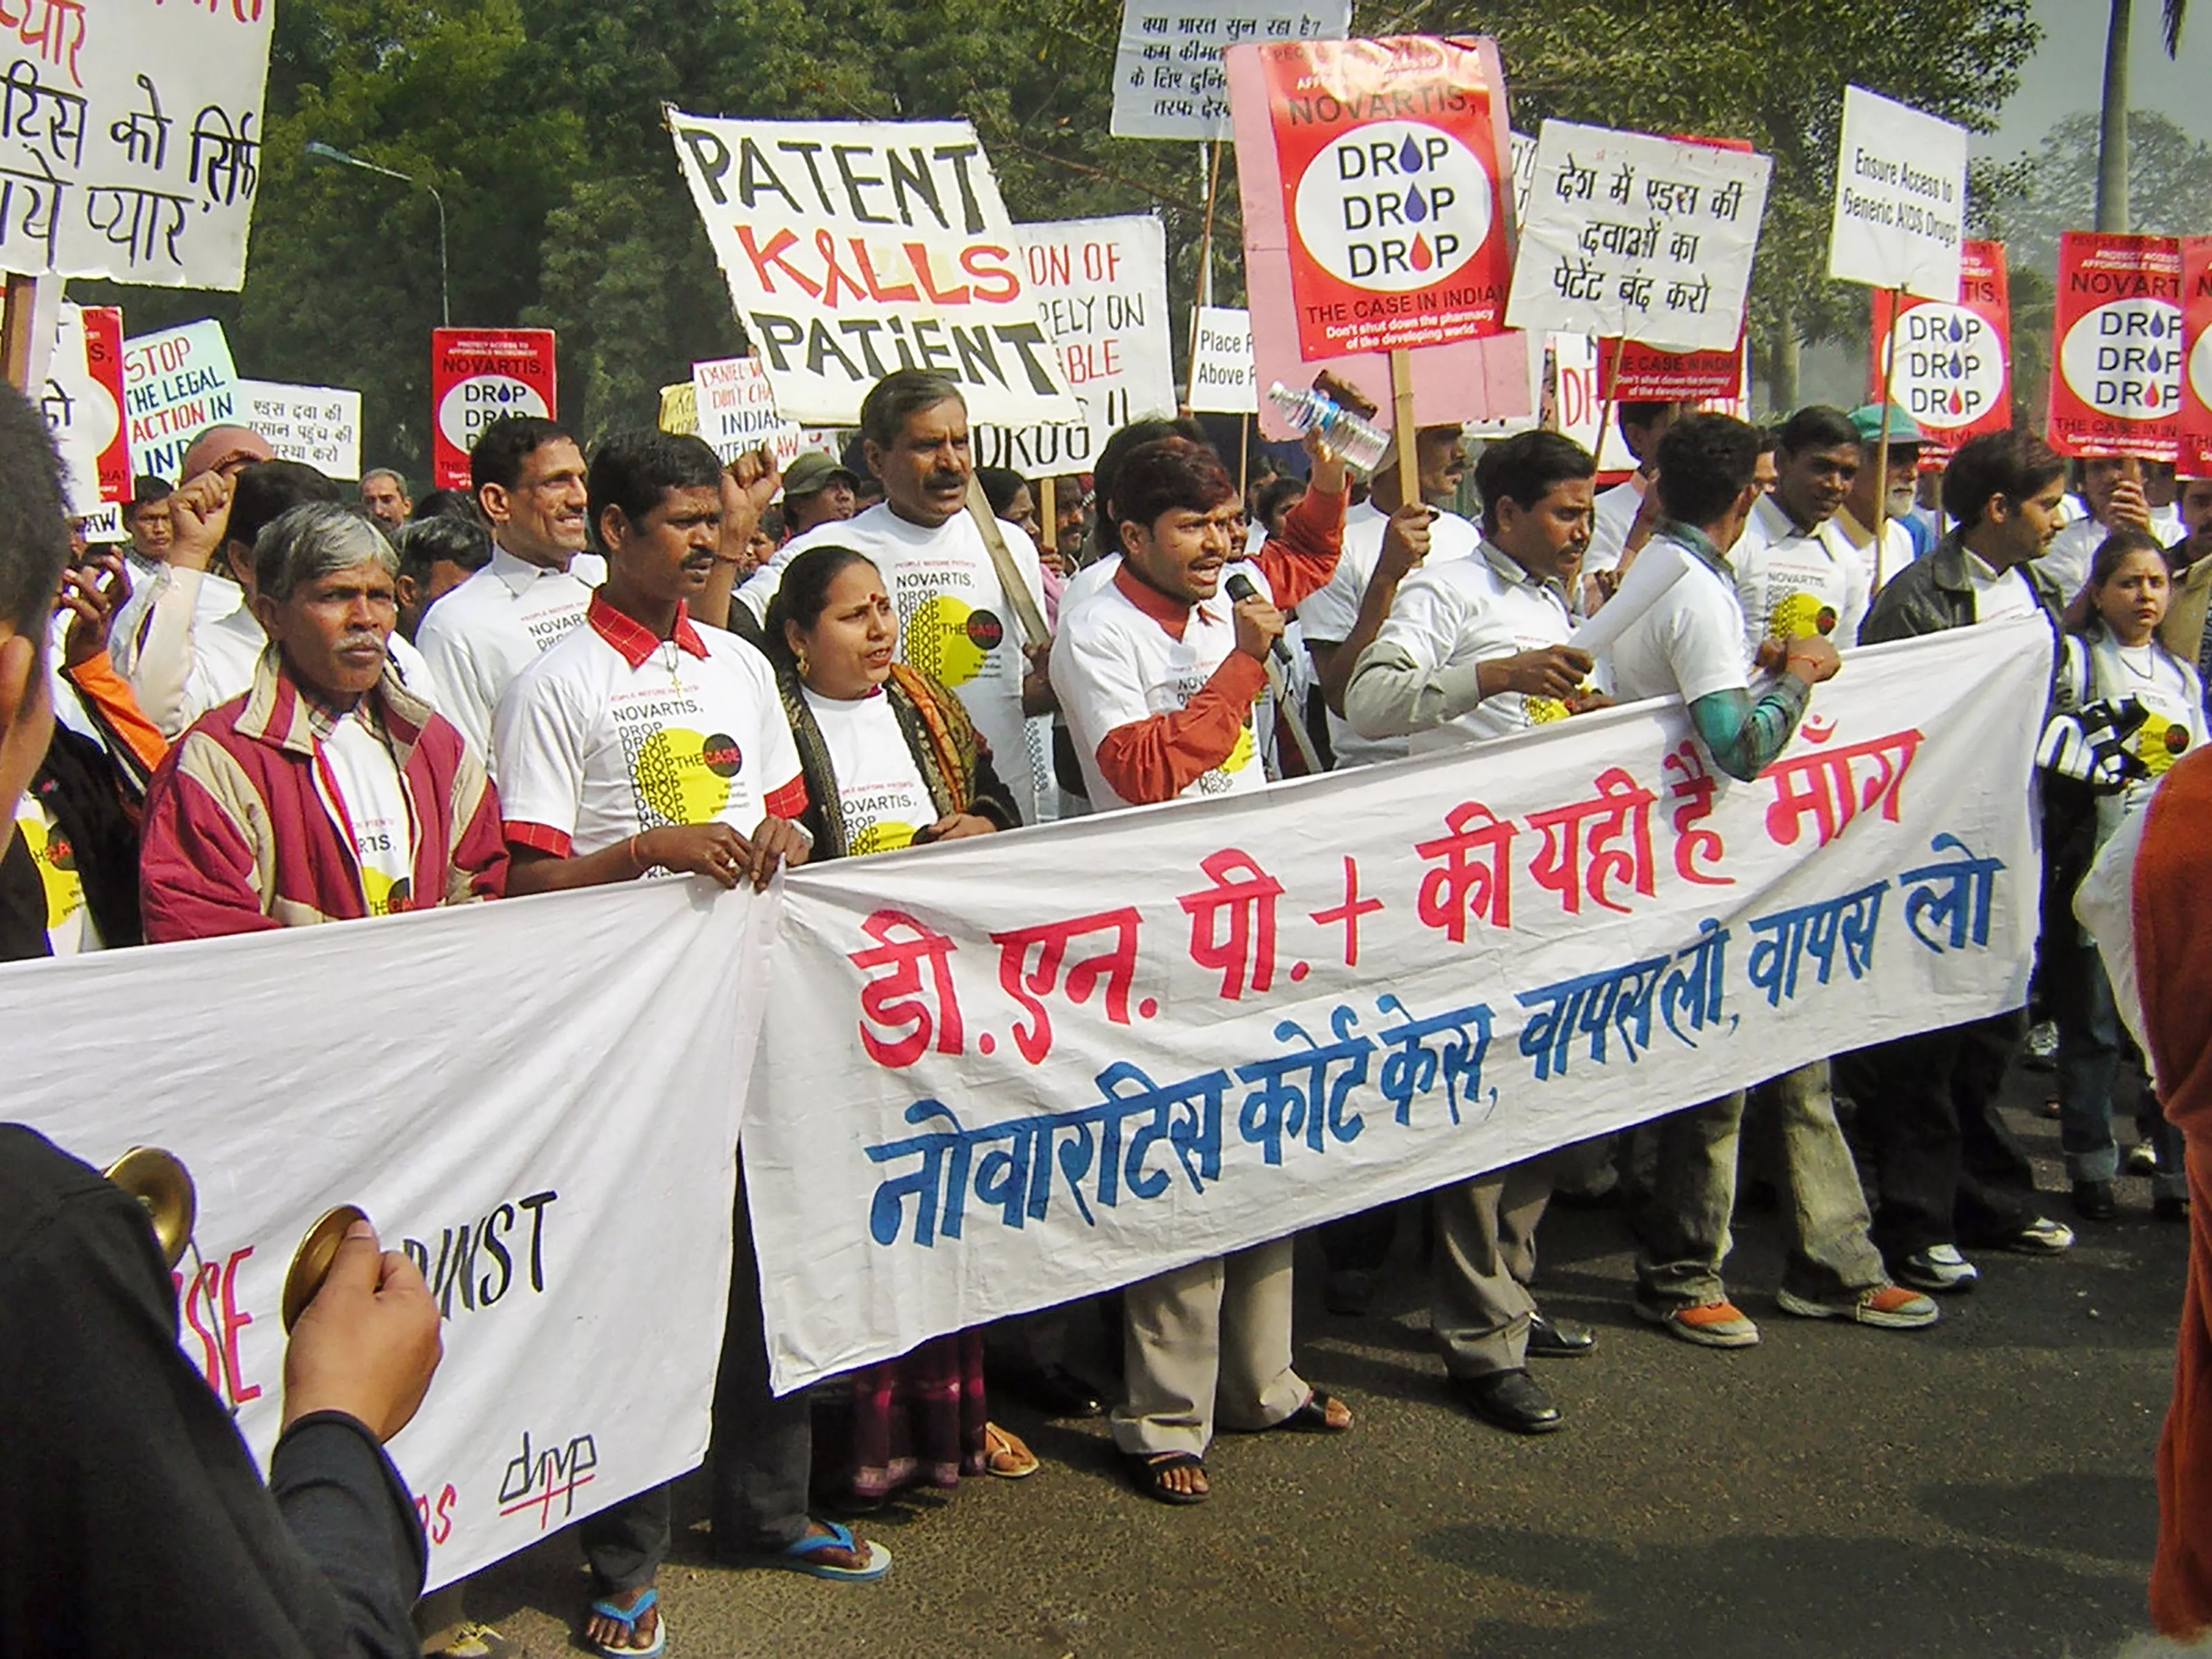 Hundreds of Indian activists protested in New Delhi on Monday against a challenge to the country's patent law by Swiss pharmaceutical giant Novartis. 